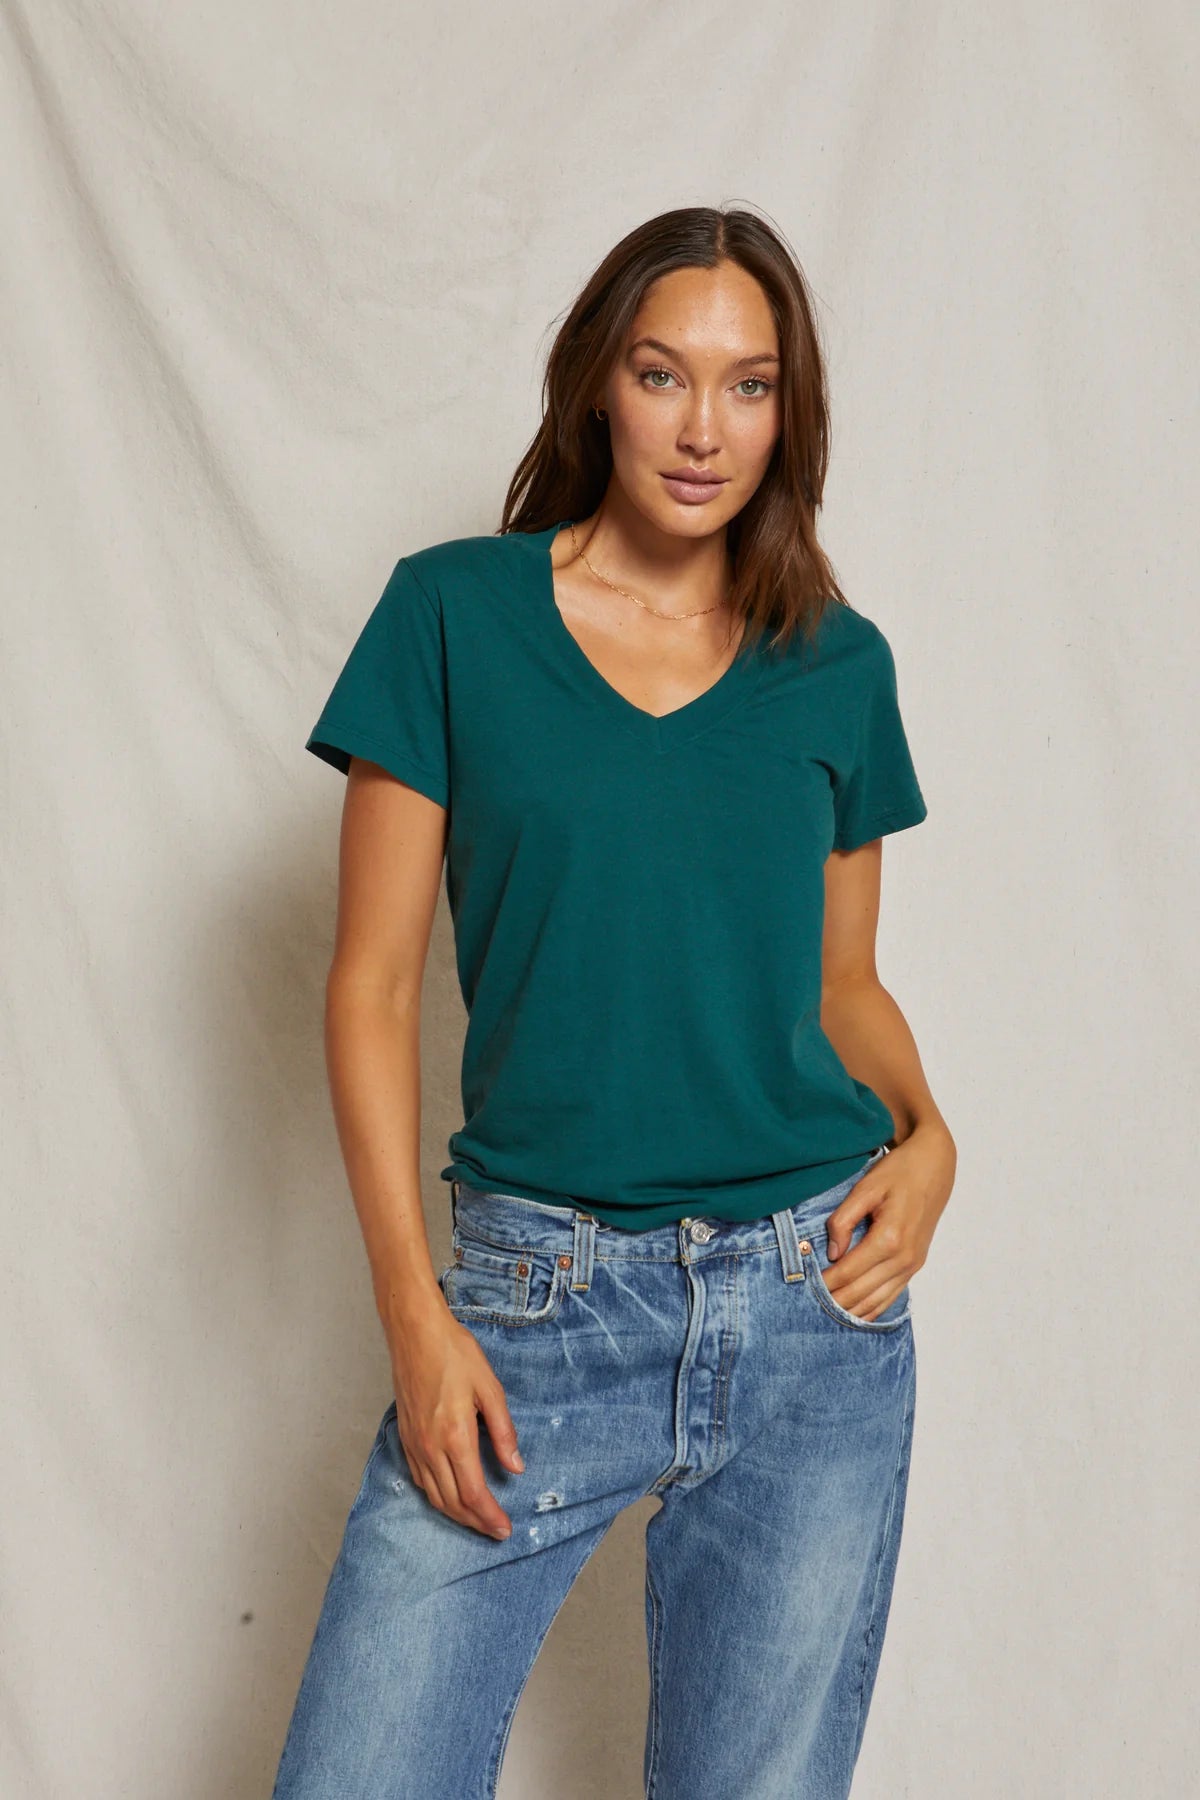 Perfect White Tee's Hendrix V-Neck Tee in the color Emerald